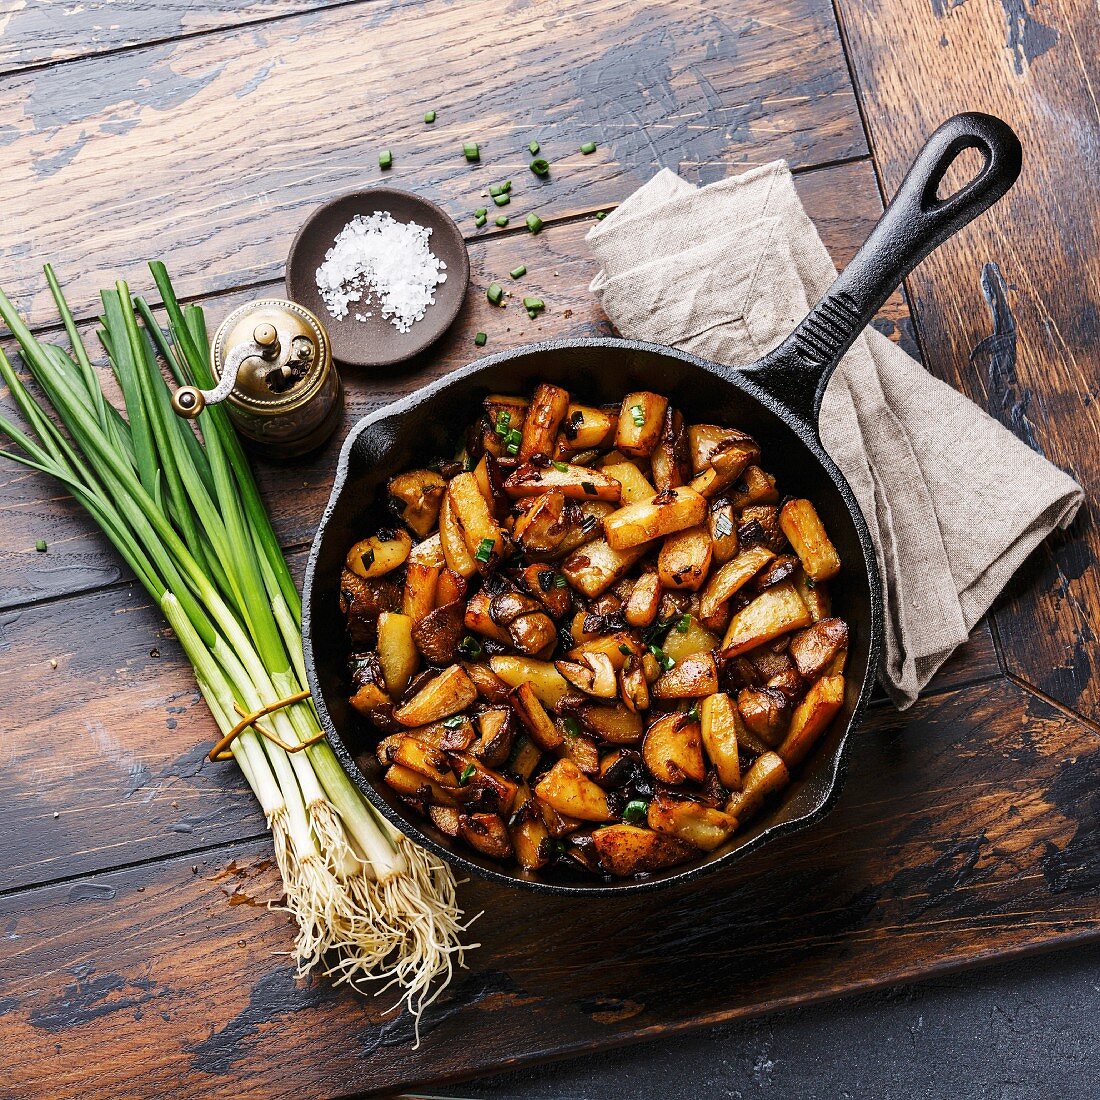 Fried potatoes roasted with porcini mushrooms in cooking pan on wooden background